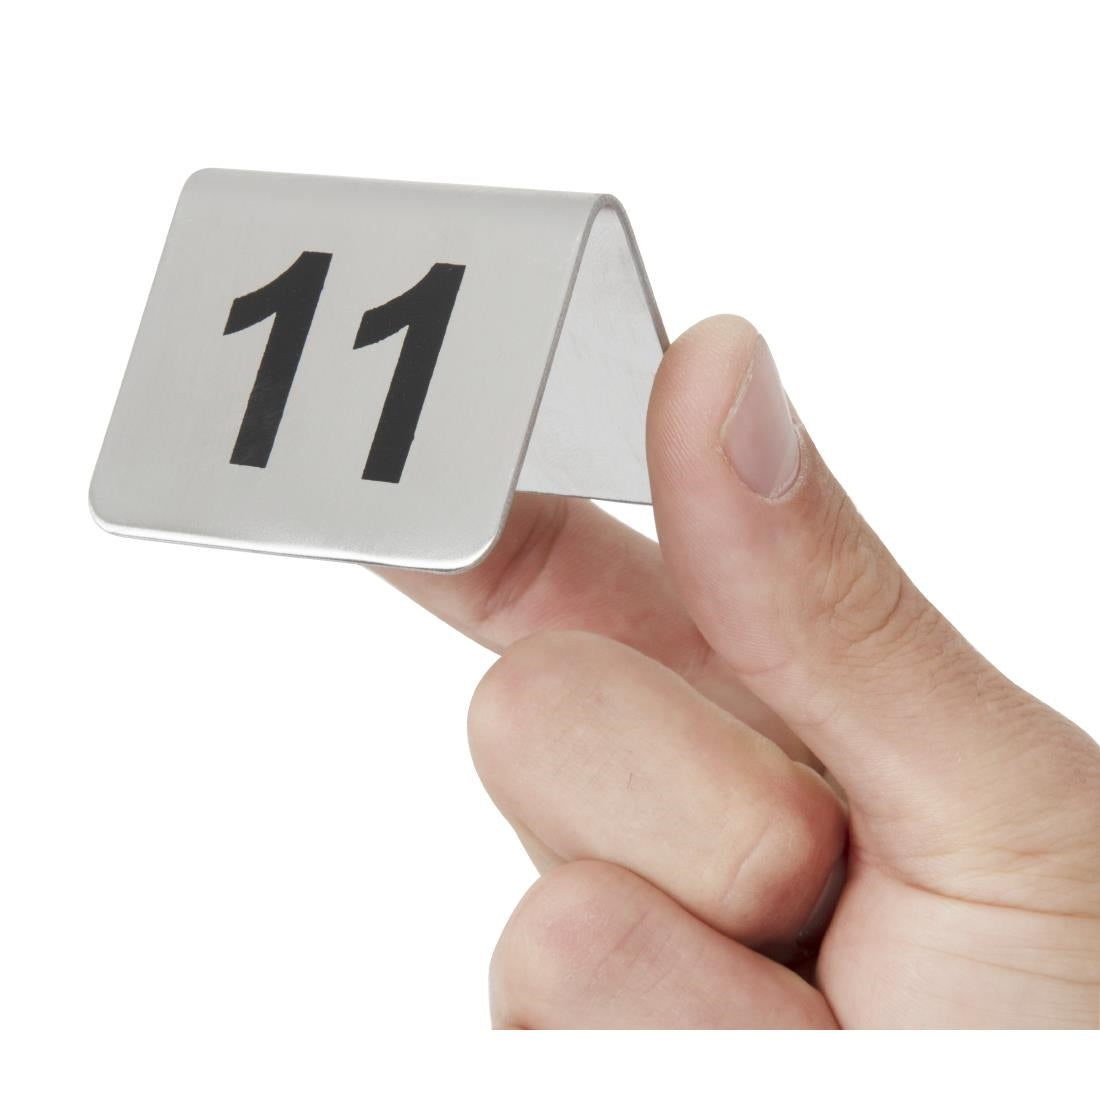 U047 Olympia Stainless Steel Table Numbers 11-20 (Pack of 10)